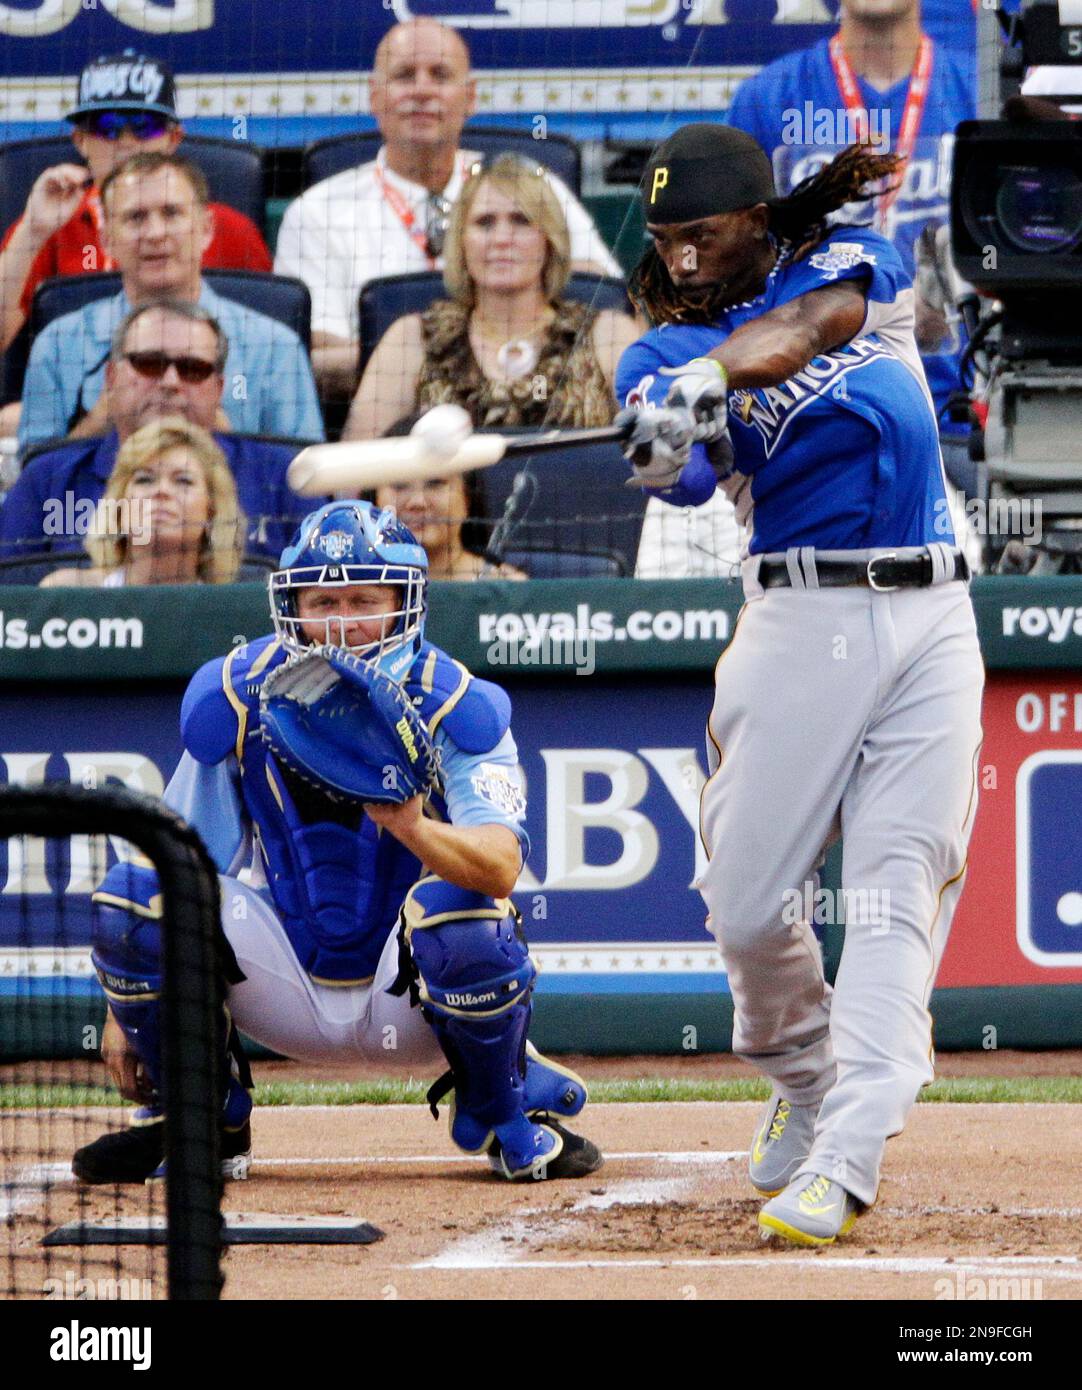 National League's Andrew McCutchen, of the Pittsburgh Pirates, swings  during the MLB All-Star baseball Home Run Derby, Monday, July 9, 2012, in  Kansas City, Mo. (AP Photo/Jeff Roberson Stock Photo - Alamy